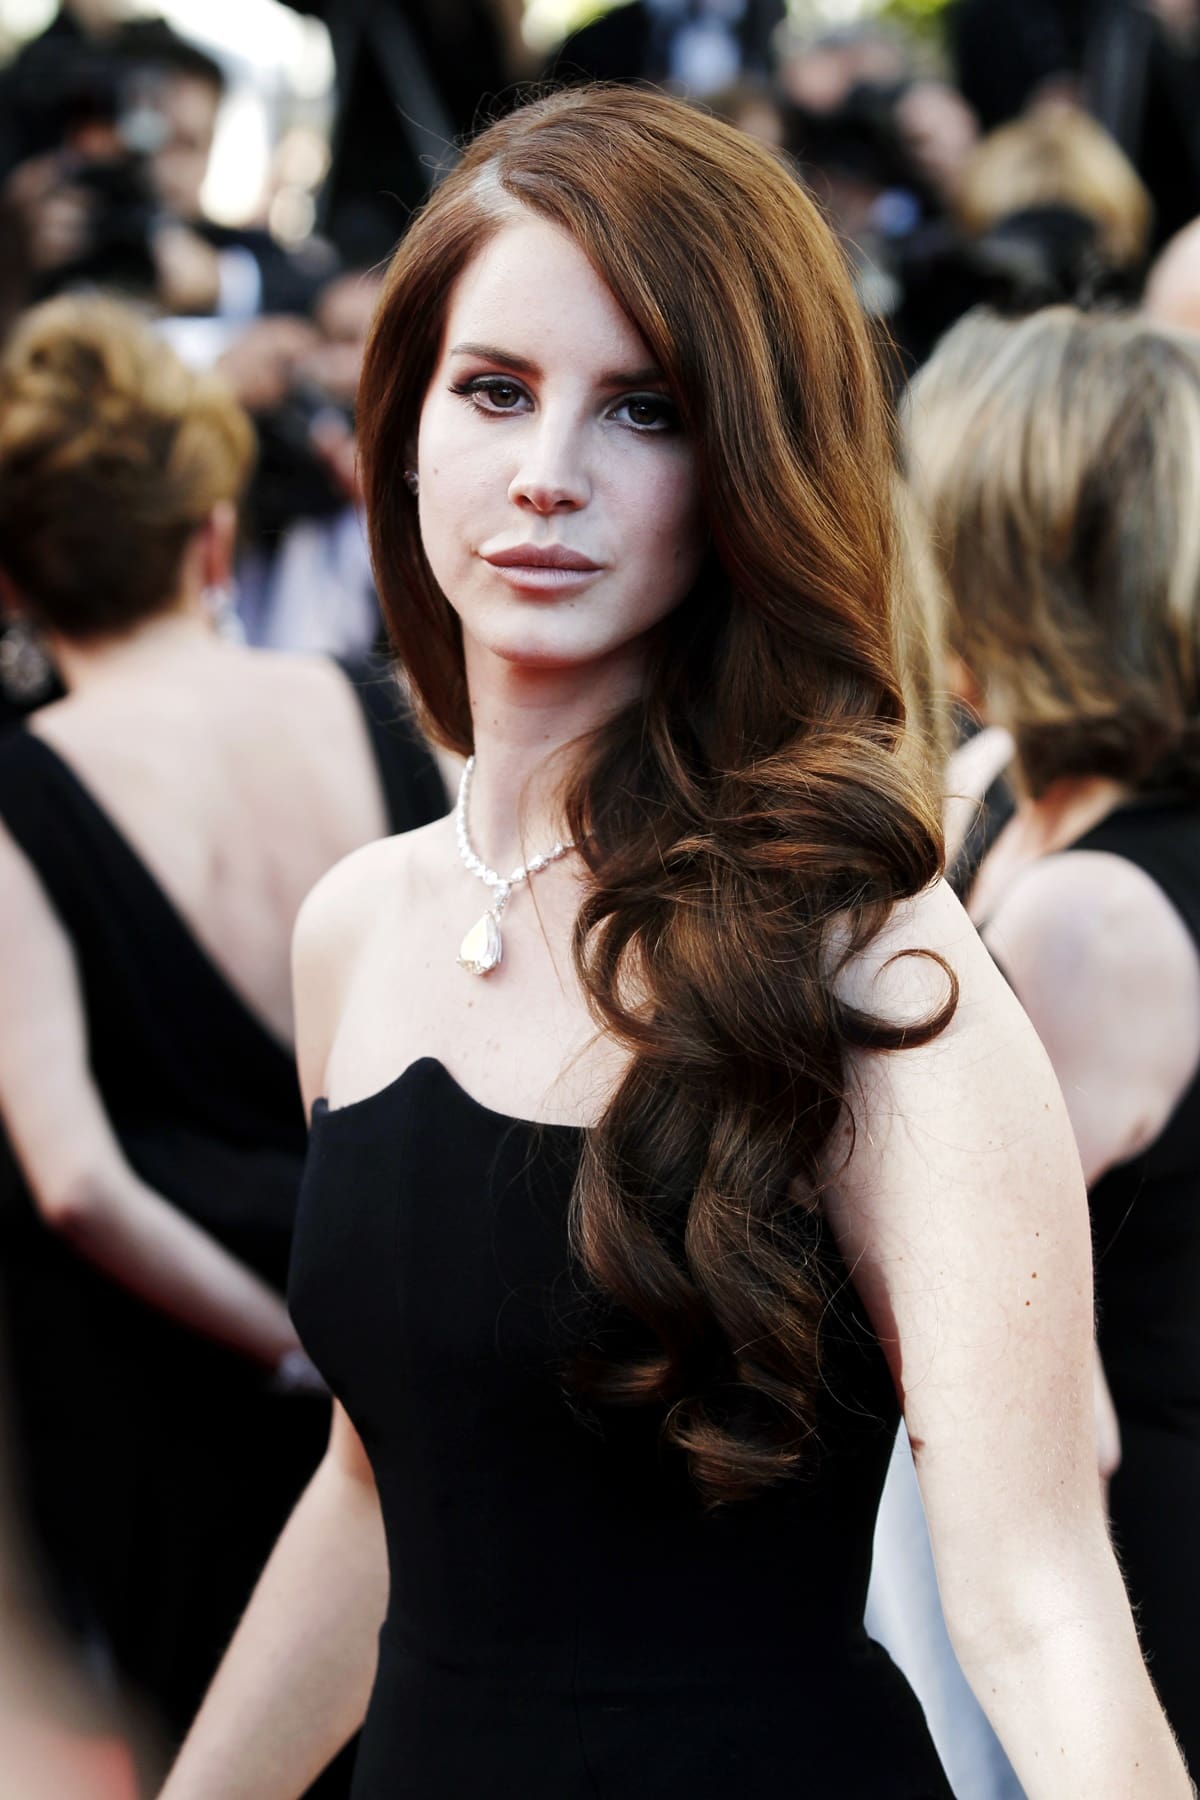 Lana Del Rey looked stunning in a black Alberta Ferretti Fall 2012 gown and a silver Chopard necklace at the opening ceremony premiere during the 65th Cannes Film Festival